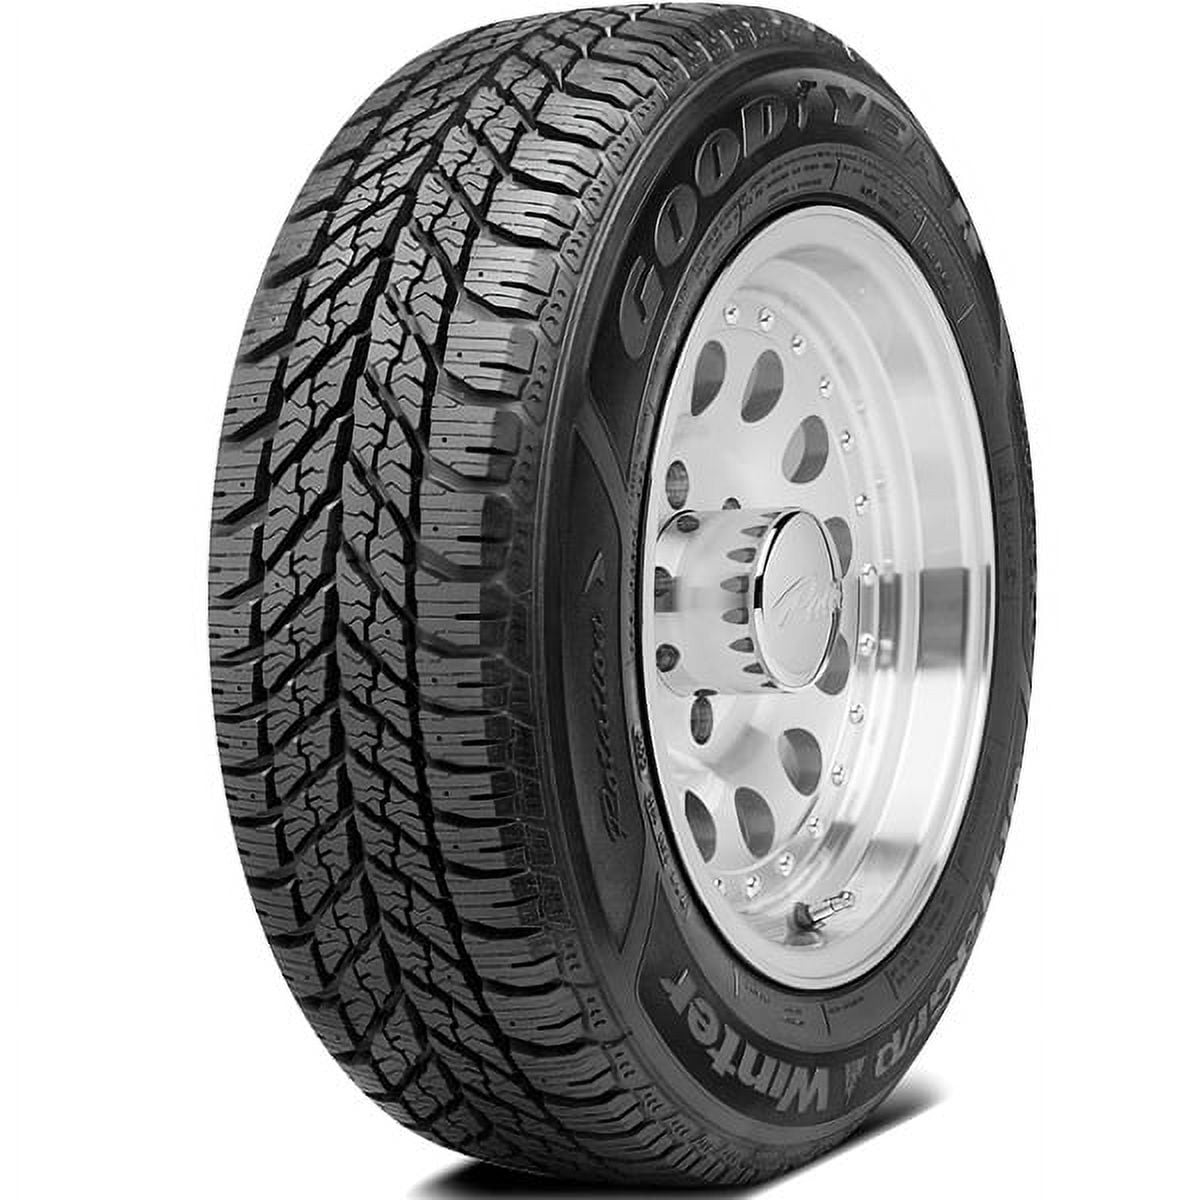 Winter 195/60R15 SE, 2005-06 2007-11 Grip Ford Ultra Passenger Focus Fits: Tire Ford Focus Winter ZX4 88T Goodyear